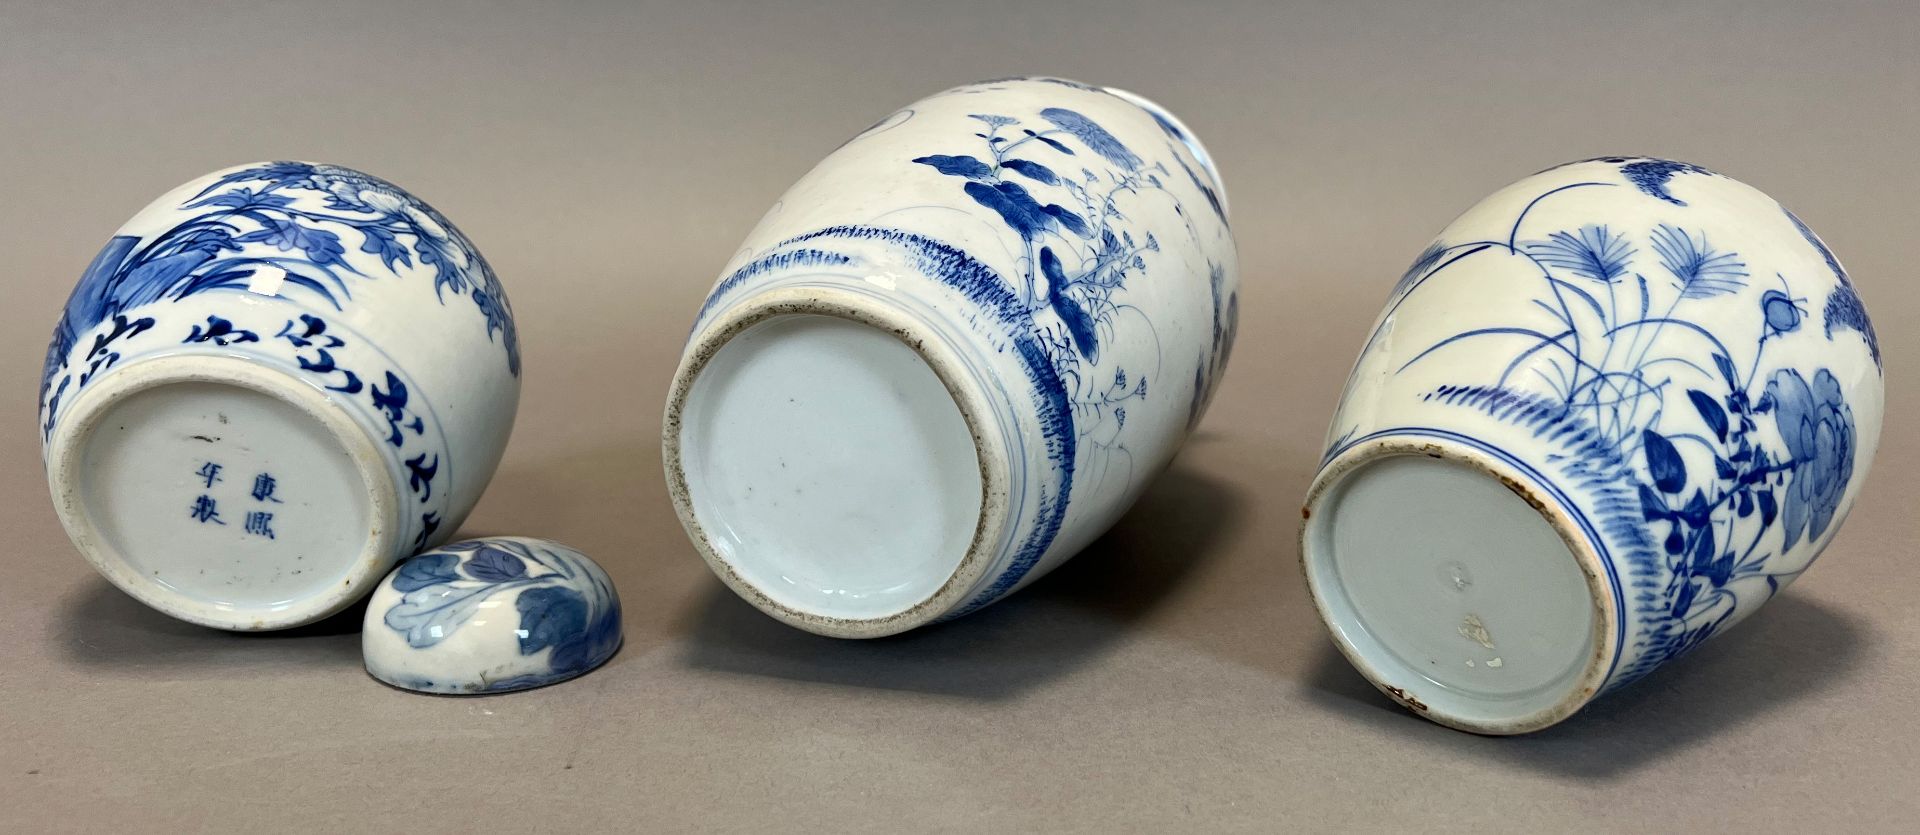 Three blue and white vases with floral decoration. China. Around 1900. - Image 5 of 13